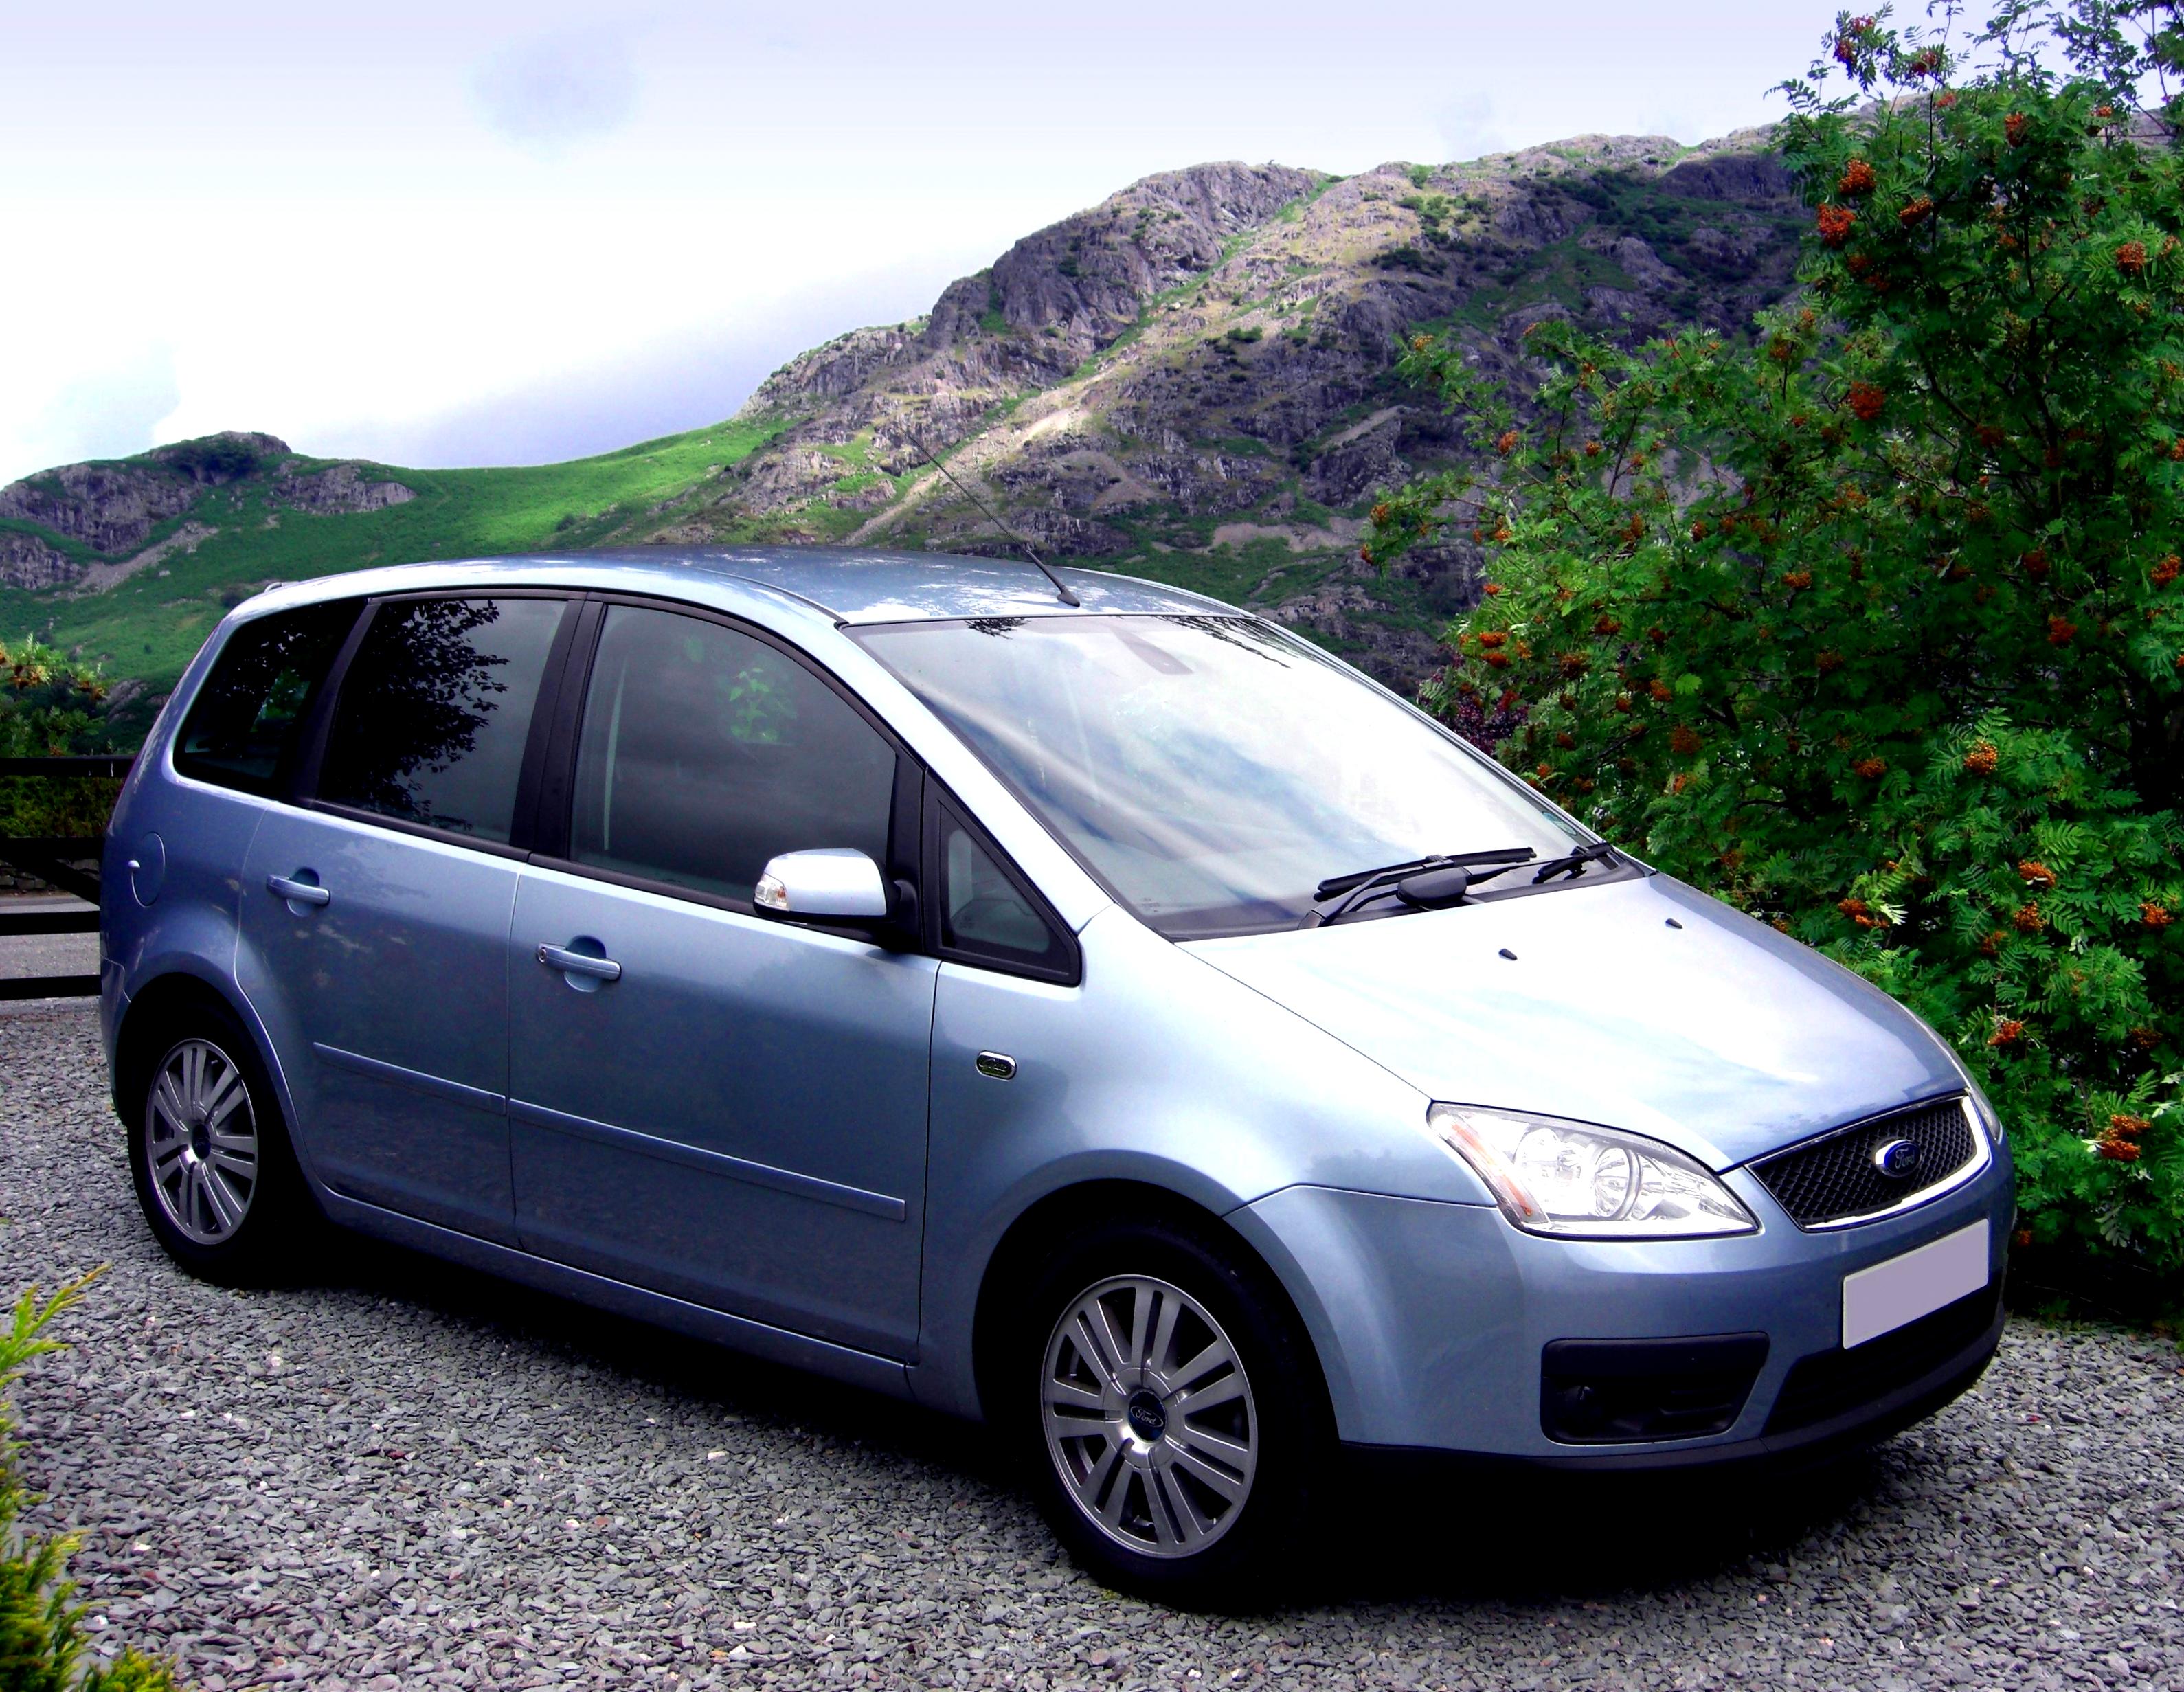 Ford CMax 2007 on